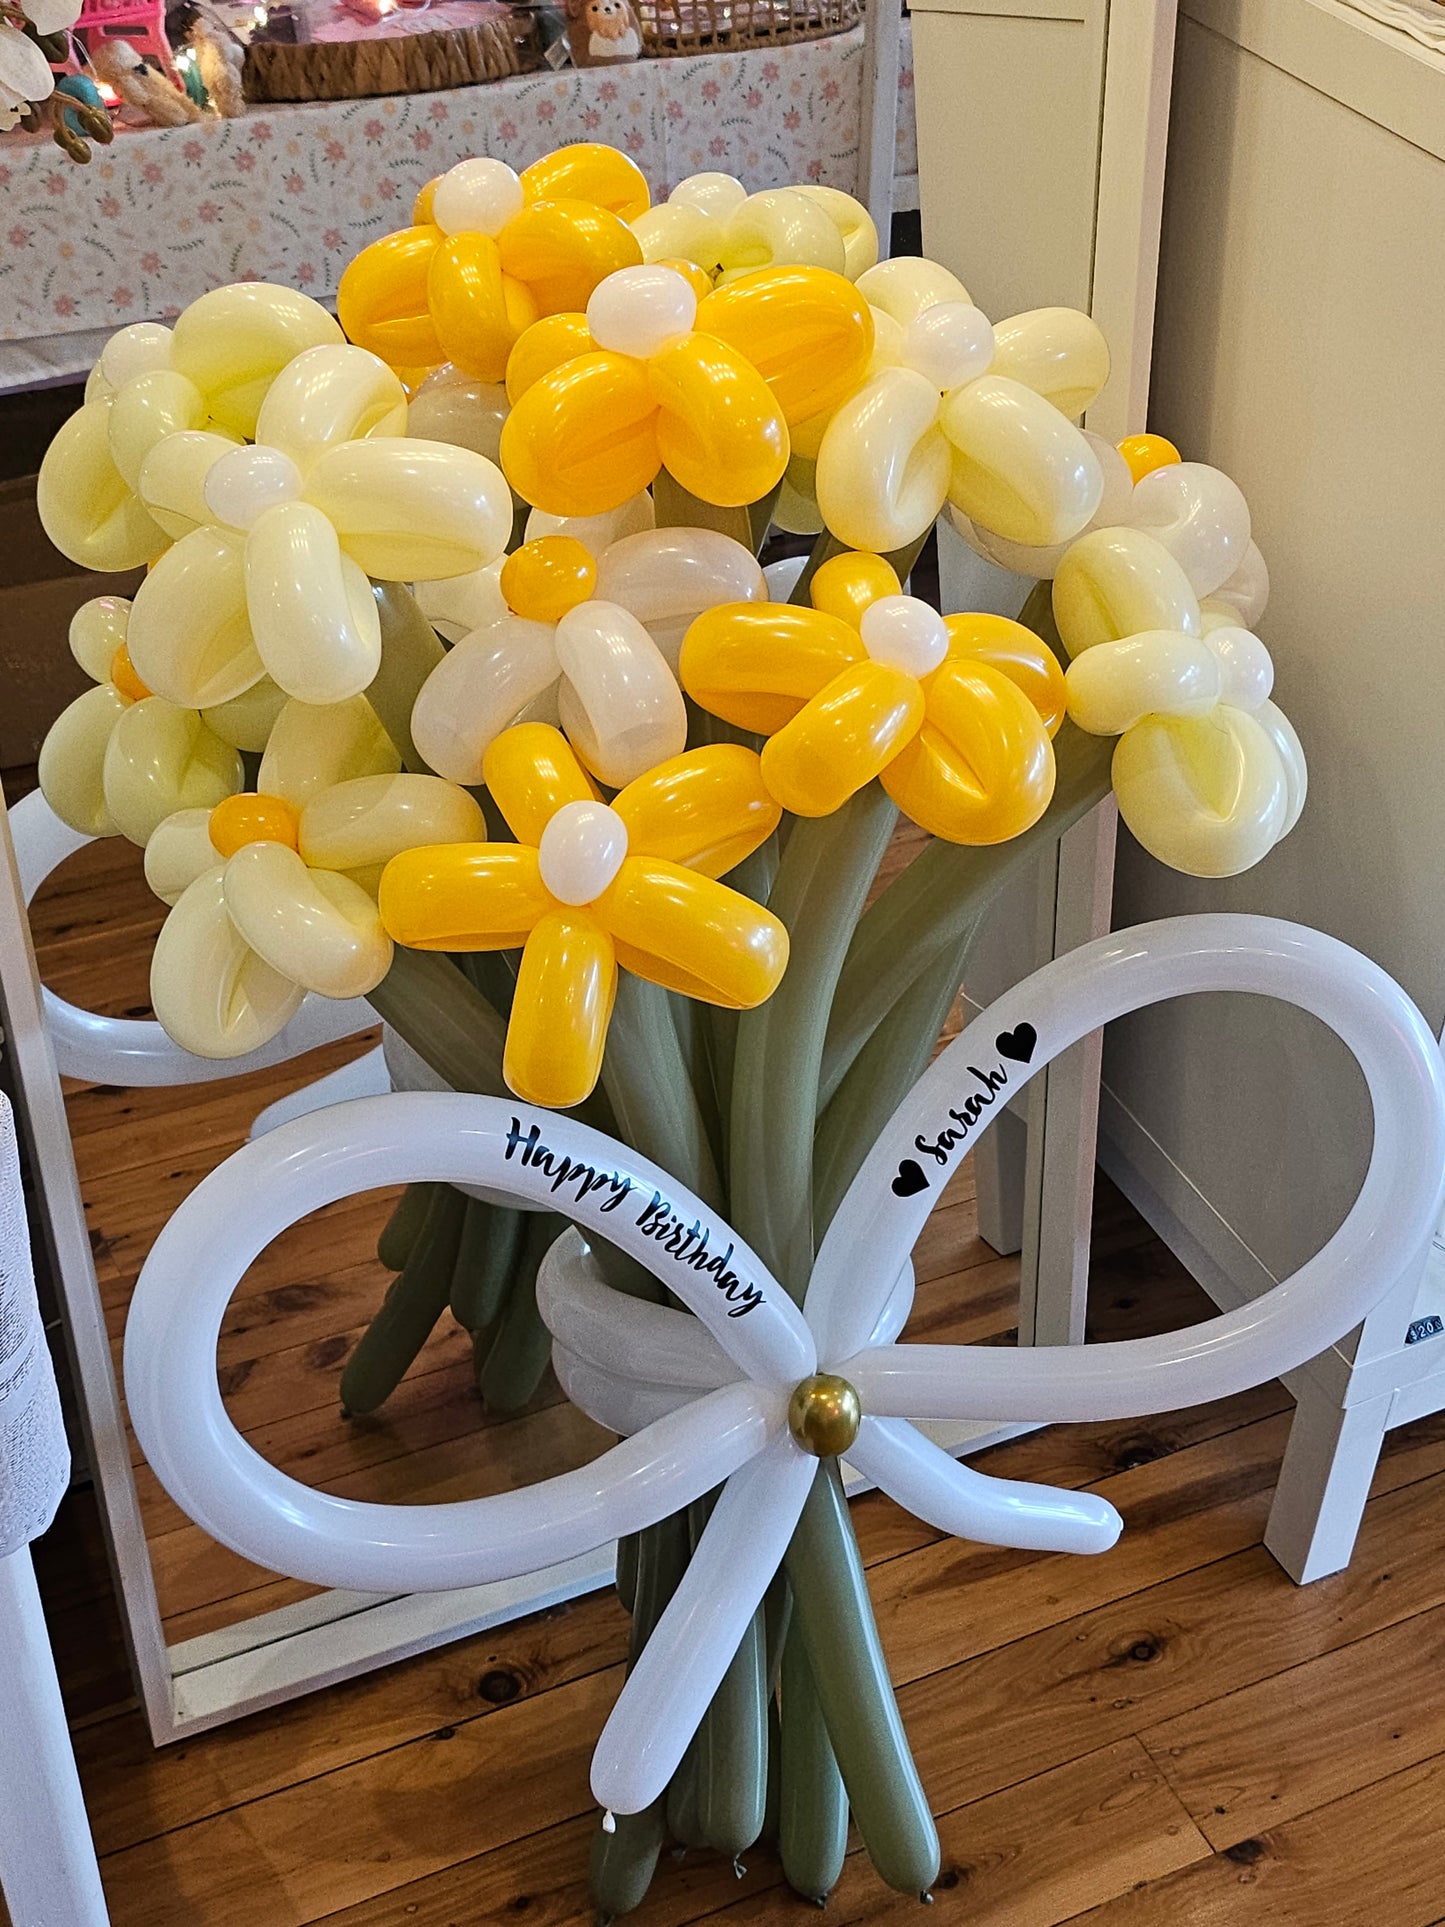 [BEST SELLERS] Celebratory Gift Balloons - Daisy Bouquet Balloons